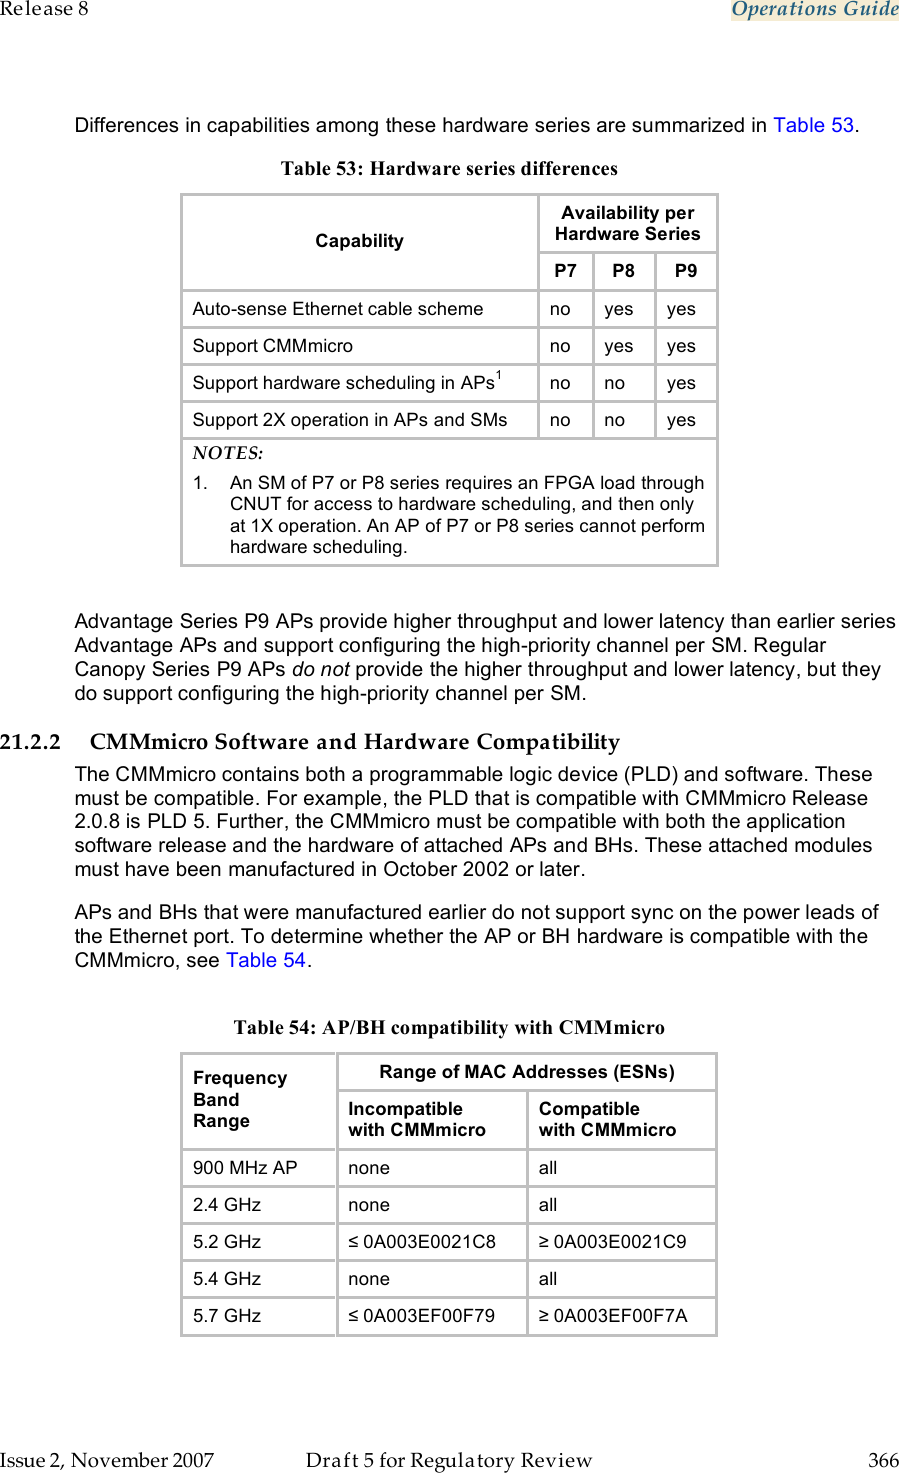 Release 8    Operations Guide   Issue 2, November 2007  Draft 5 for Regulatory Review  366      Differences in capabilities among these hardware series are summarized in Table 53. Table 53: Hardware series differences Availability per Hardware Series Capability P7 P8 P9 Auto-sense Ethernet cable scheme no yes yes Support CMMmicro no yes yes Support hardware scheduling in APs1 no no yes Support 2X operation in APs and SMs no no yes NOTES: 1.  An SM of P7 or P8 series requires an FPGA load through CNUT for access to hardware scheduling, and then only  at 1X operation. An AP of P7 or P8 series cannot perform  hardware scheduling.  Advantage Series P9 APs provide higher throughput and lower latency than earlier series Advantage APs and support configuring the high-priority channel per SM. Regular Canopy Series P9 APs do not provide the higher throughput and lower latency, but they do support configuring the high-priority channel per SM. 21.2.2 CMMmicro Software and Hardware Compatibility The CMMmicro contains both a programmable logic device (PLD) and software. These must be compatible. For example, the PLD that is compatible with CMMmicro Release 2.0.8 is PLD 5. Further, the CMMmicro must be compatible with both the application software release and the hardware of attached APs and BHs. These attached modules must have been manufactured in October 2002 or later. APs and BHs that were manufactured earlier do not support sync on the power leads of the Ethernet port. To determine whether the AP or BH hardware is compatible with the CMMmicro, see Table 54.  Table 54: AP/BH compatibility with CMMmicro Range of MAC Addresses (ESNs) Frequency Band Range Incompatible with CMMmicro Compatible with CMMmicro 900 MHz AP none all 2.4 GHz none all 5.2 GHz ≤ 0A003E0021C8 ≥ 0A003E0021C9 5.4 GHz none all 5.7 GHz ≤ 0A003EF00F79 ≥ 0A003EF00F7A  